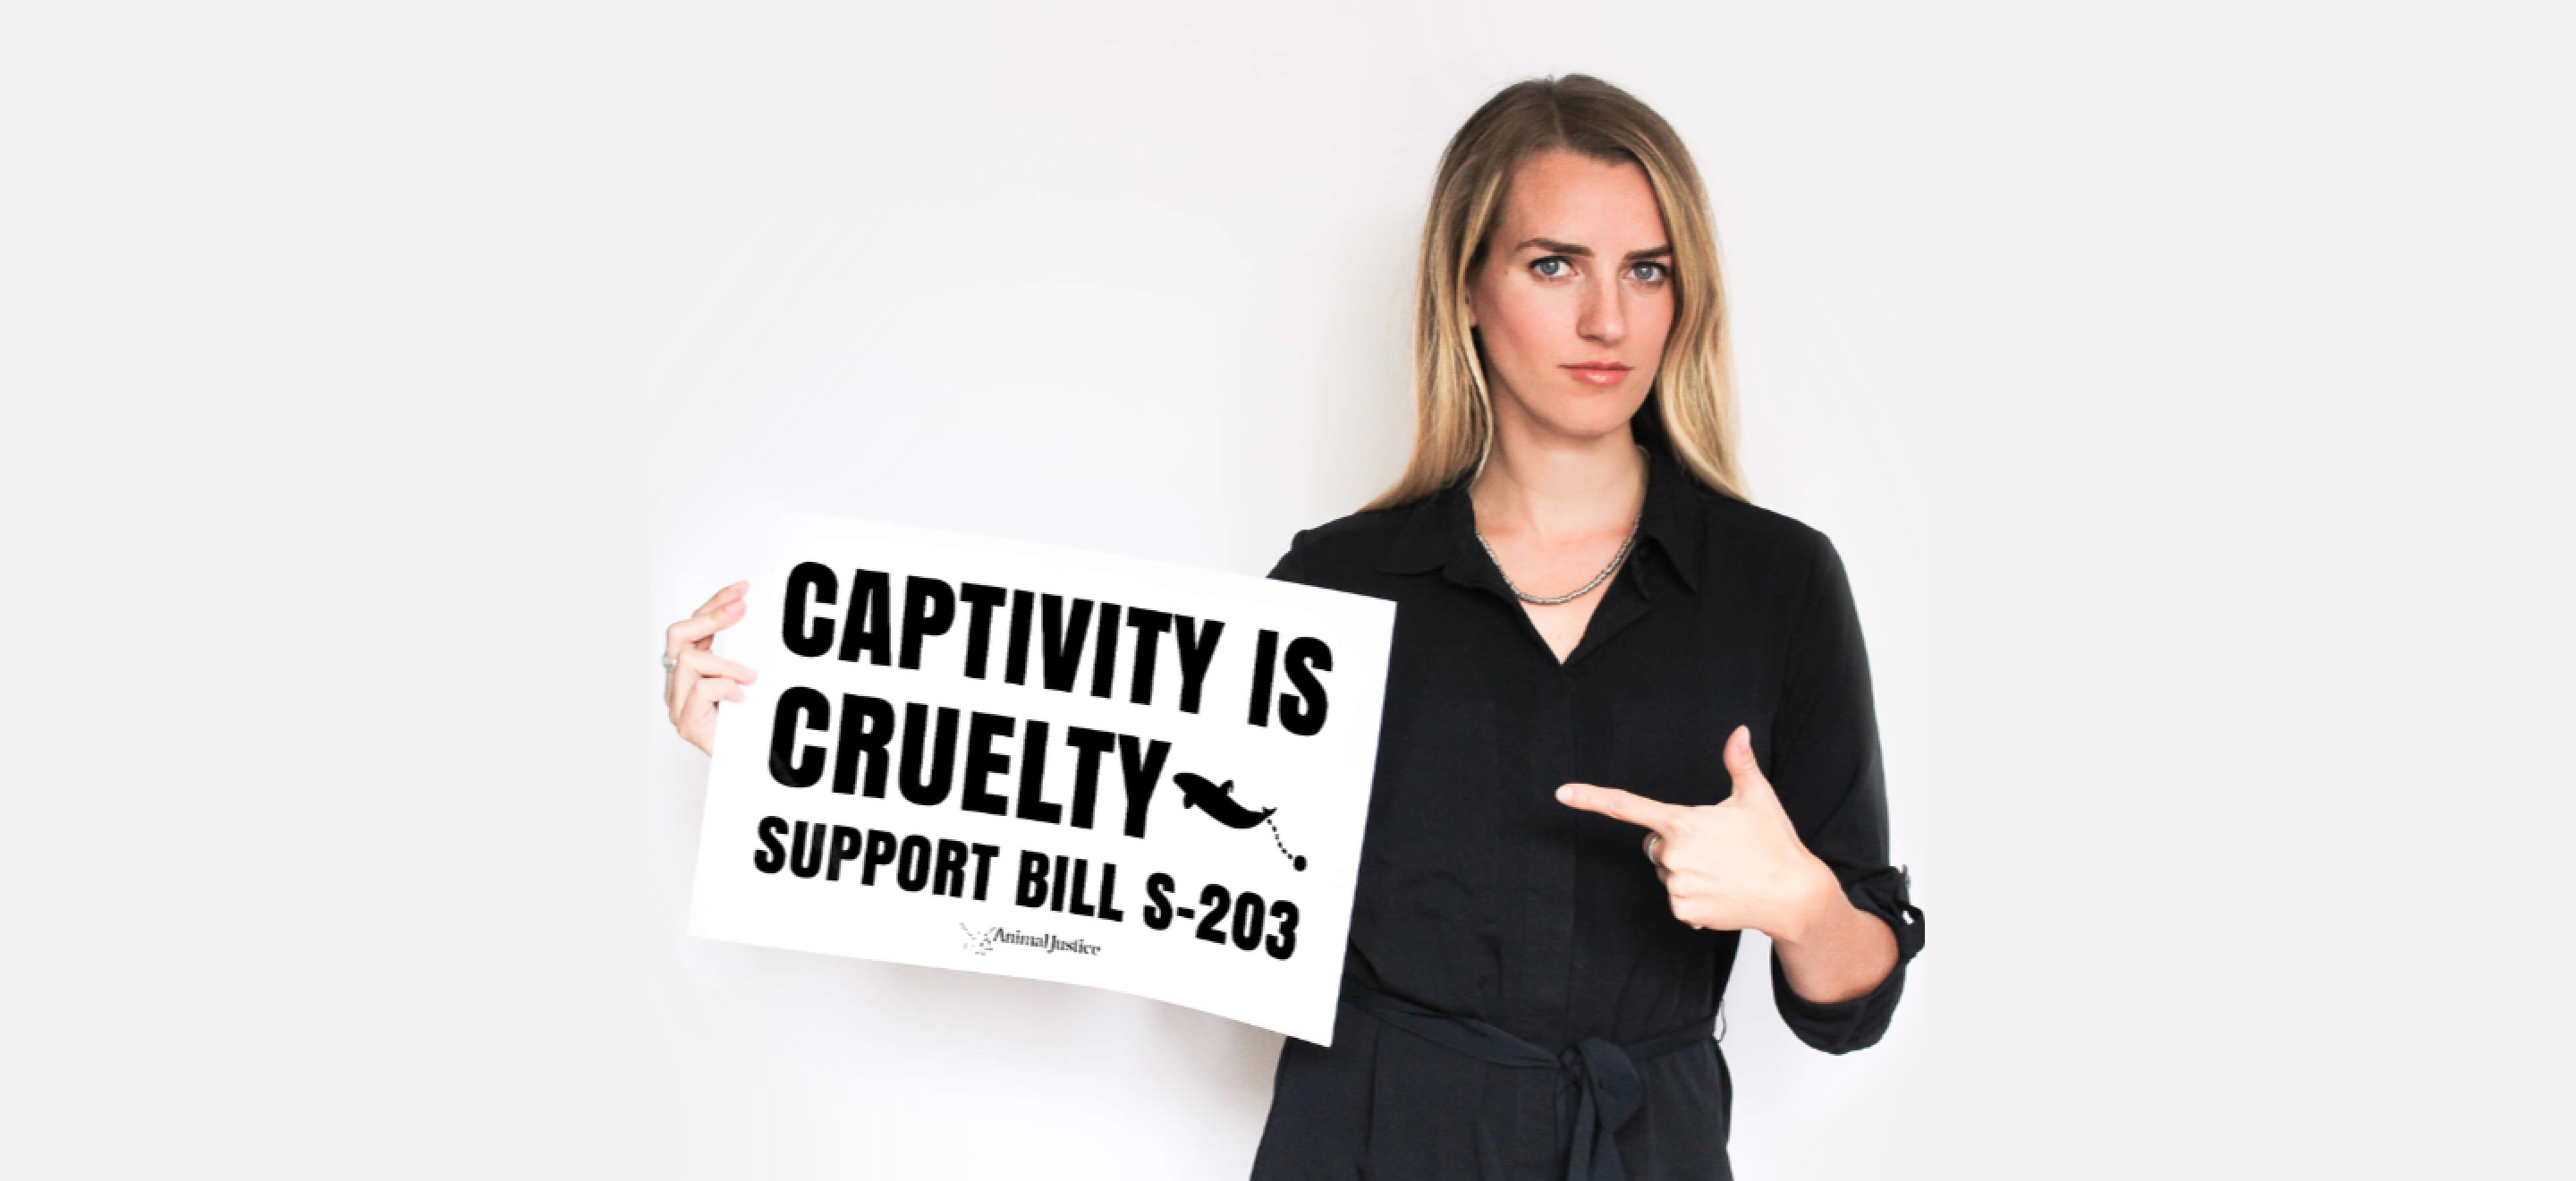 Animal Rights Lawyer, Camille Labchuk, on Canada’s Laws to Finish Shark-Finning and Cetacean Captivity and Animal Rights and Wrongs